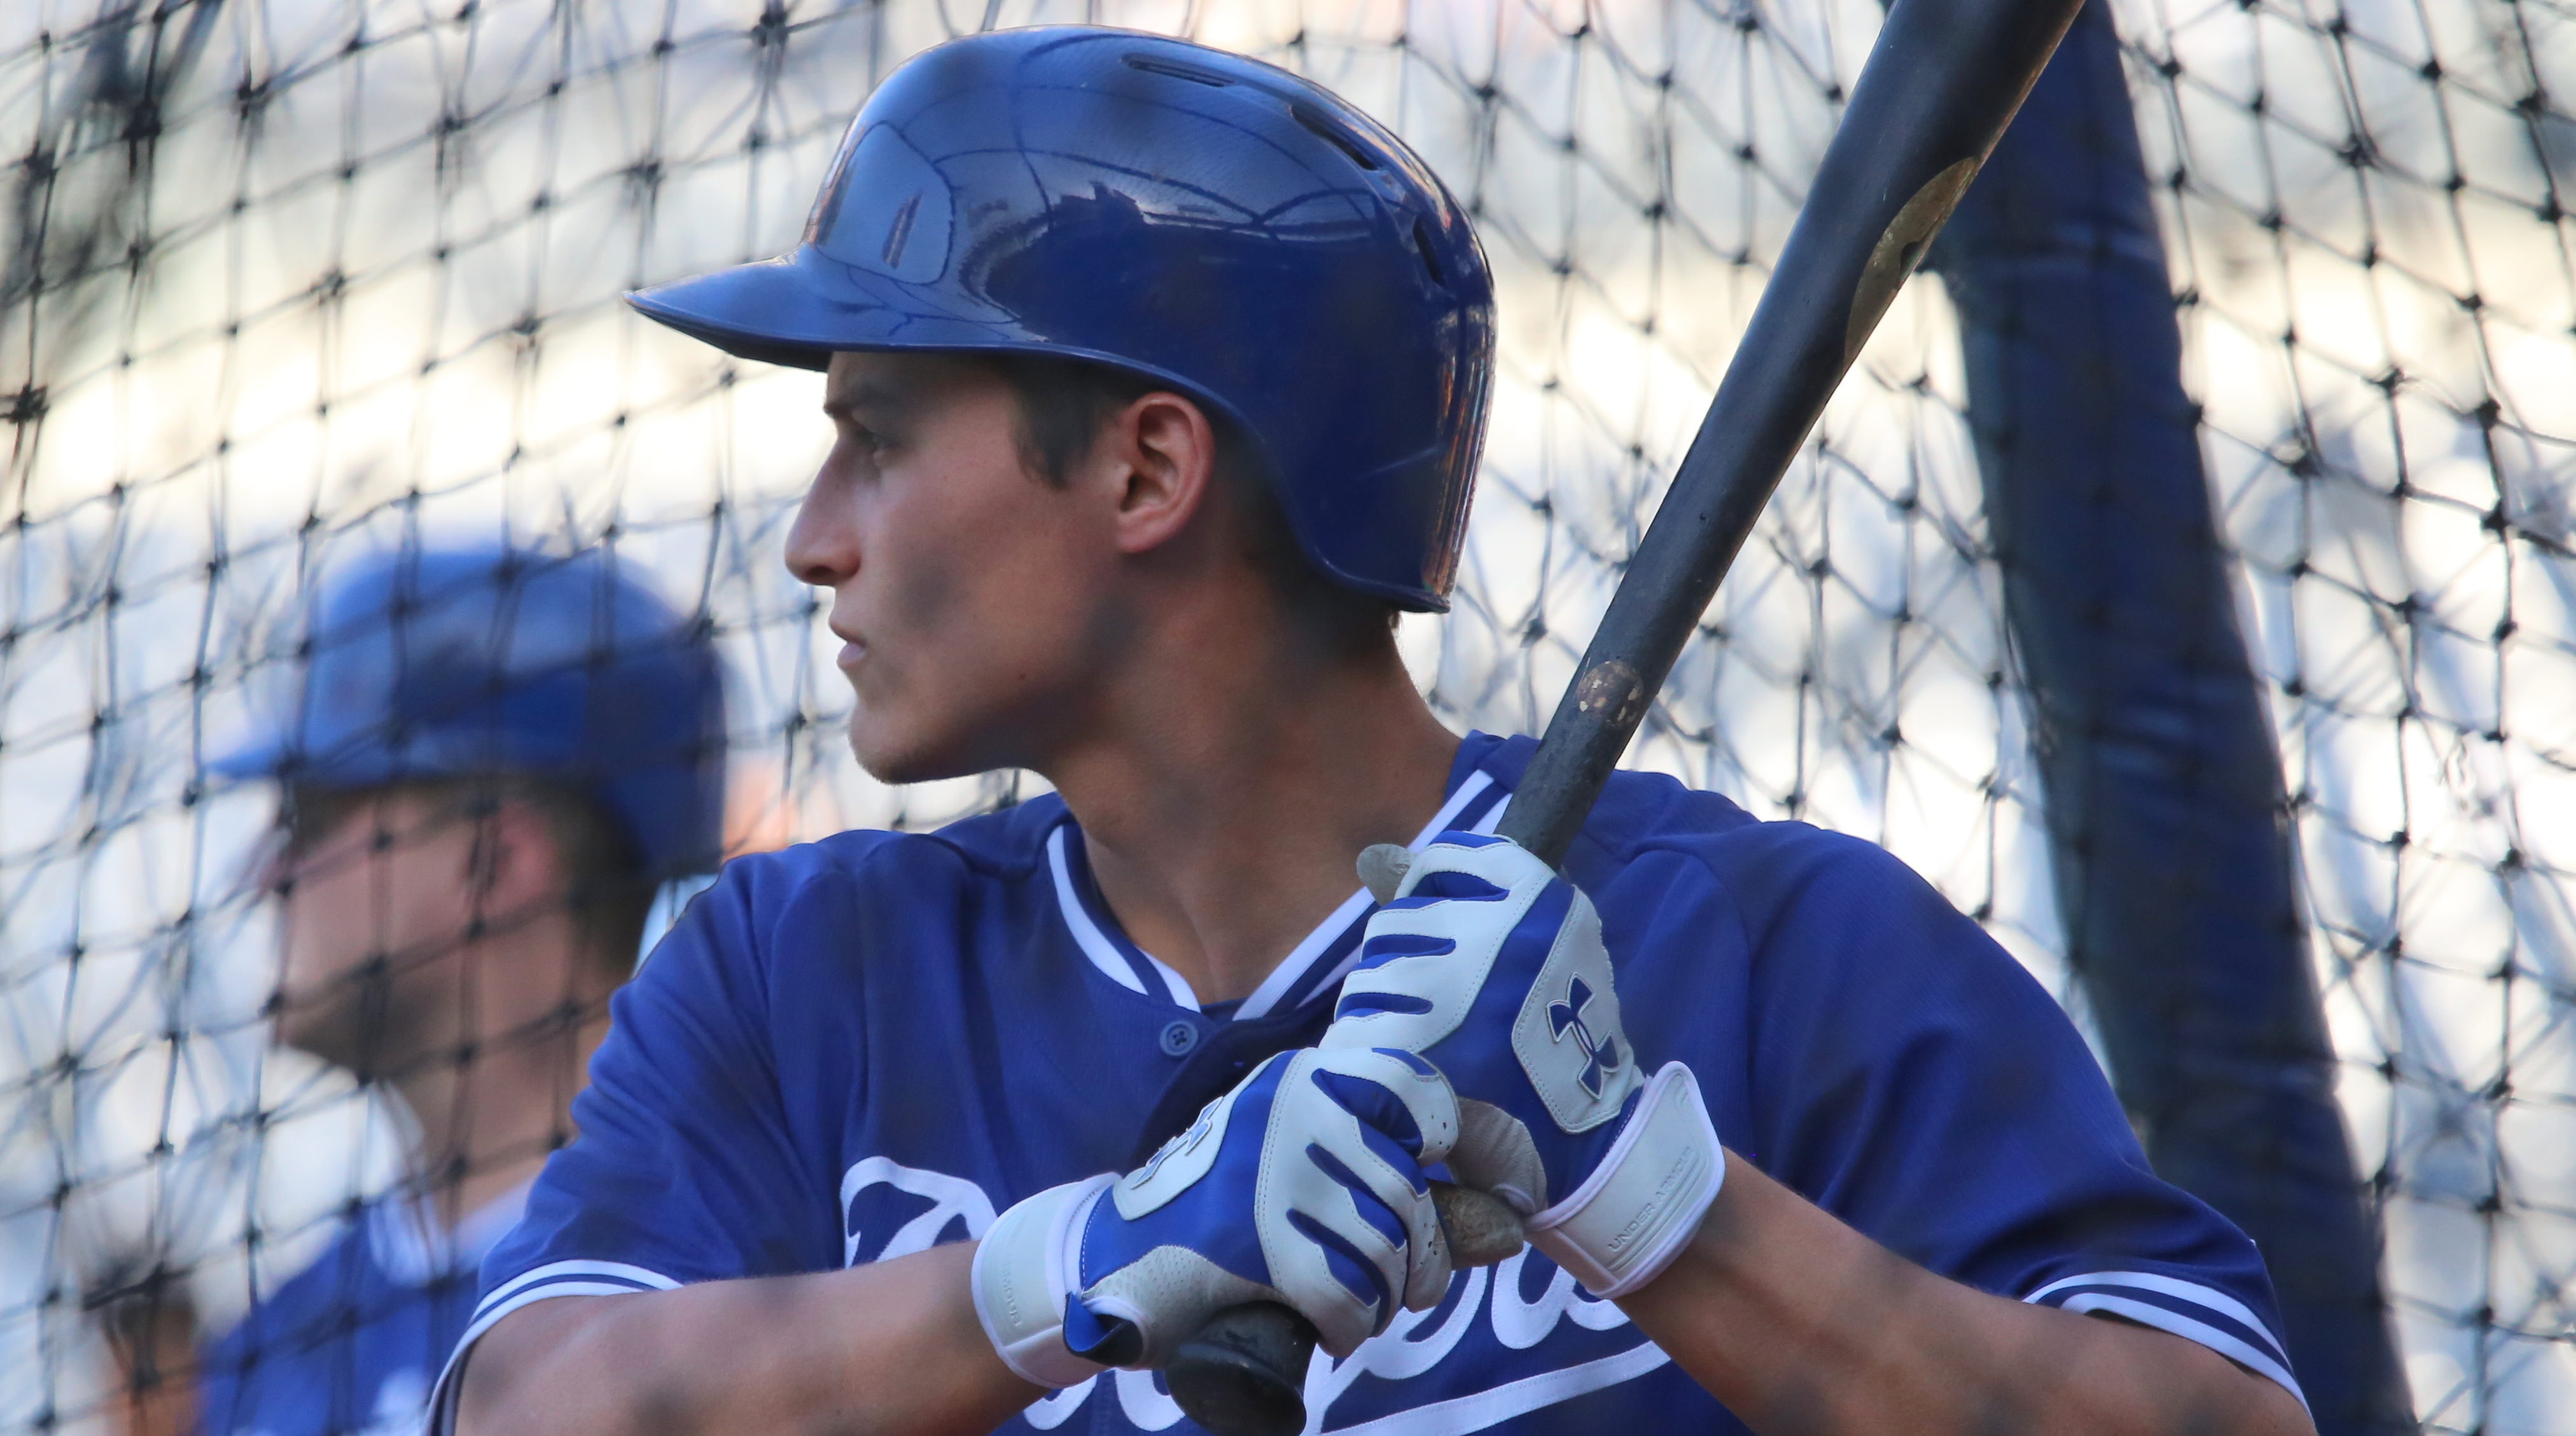 Corey Seager Wife, Brother, Age, Height, Net Worth, Stats, IG